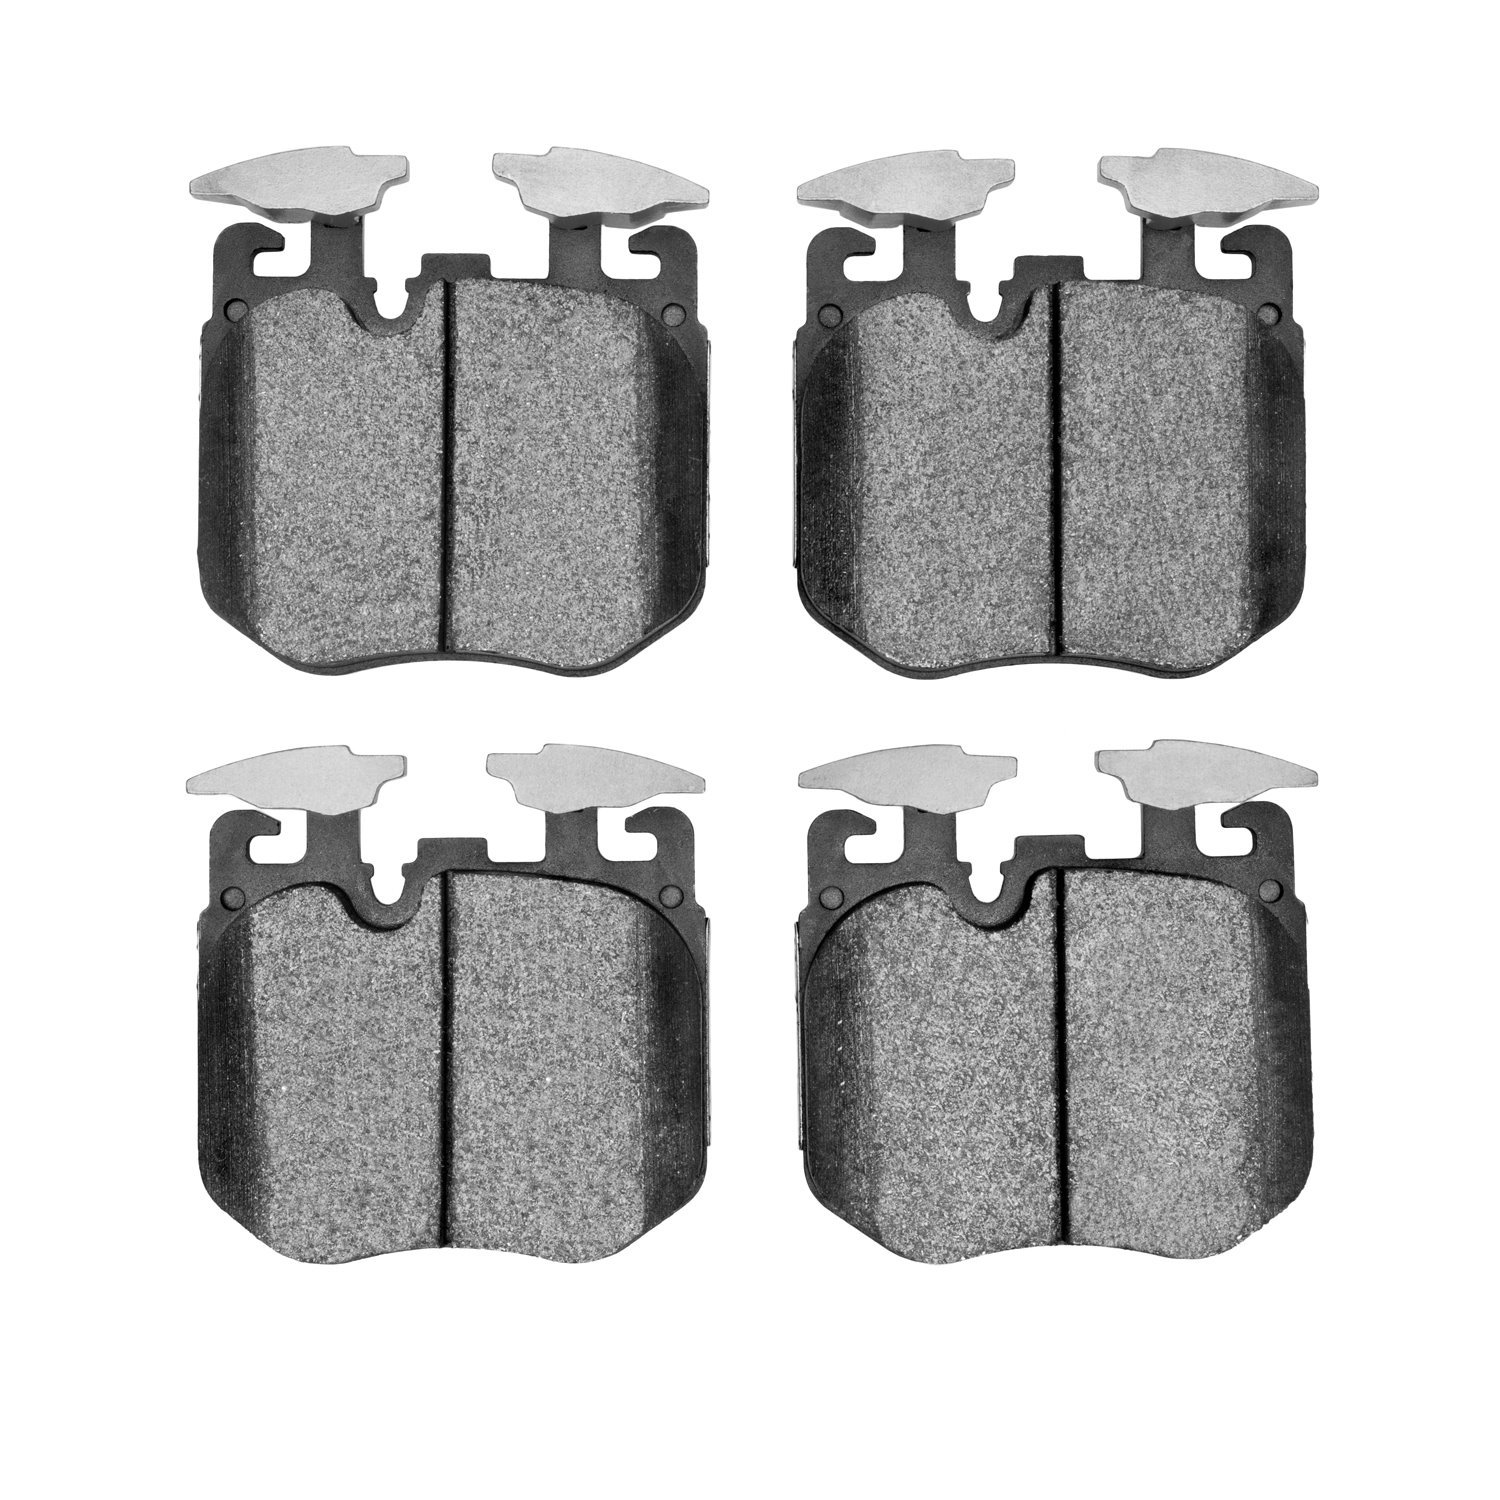 1000-1868-00 Track/Street Low-Metallic Brake Pads Kit, Fits Select Multiple Makes/Models, Position: Front